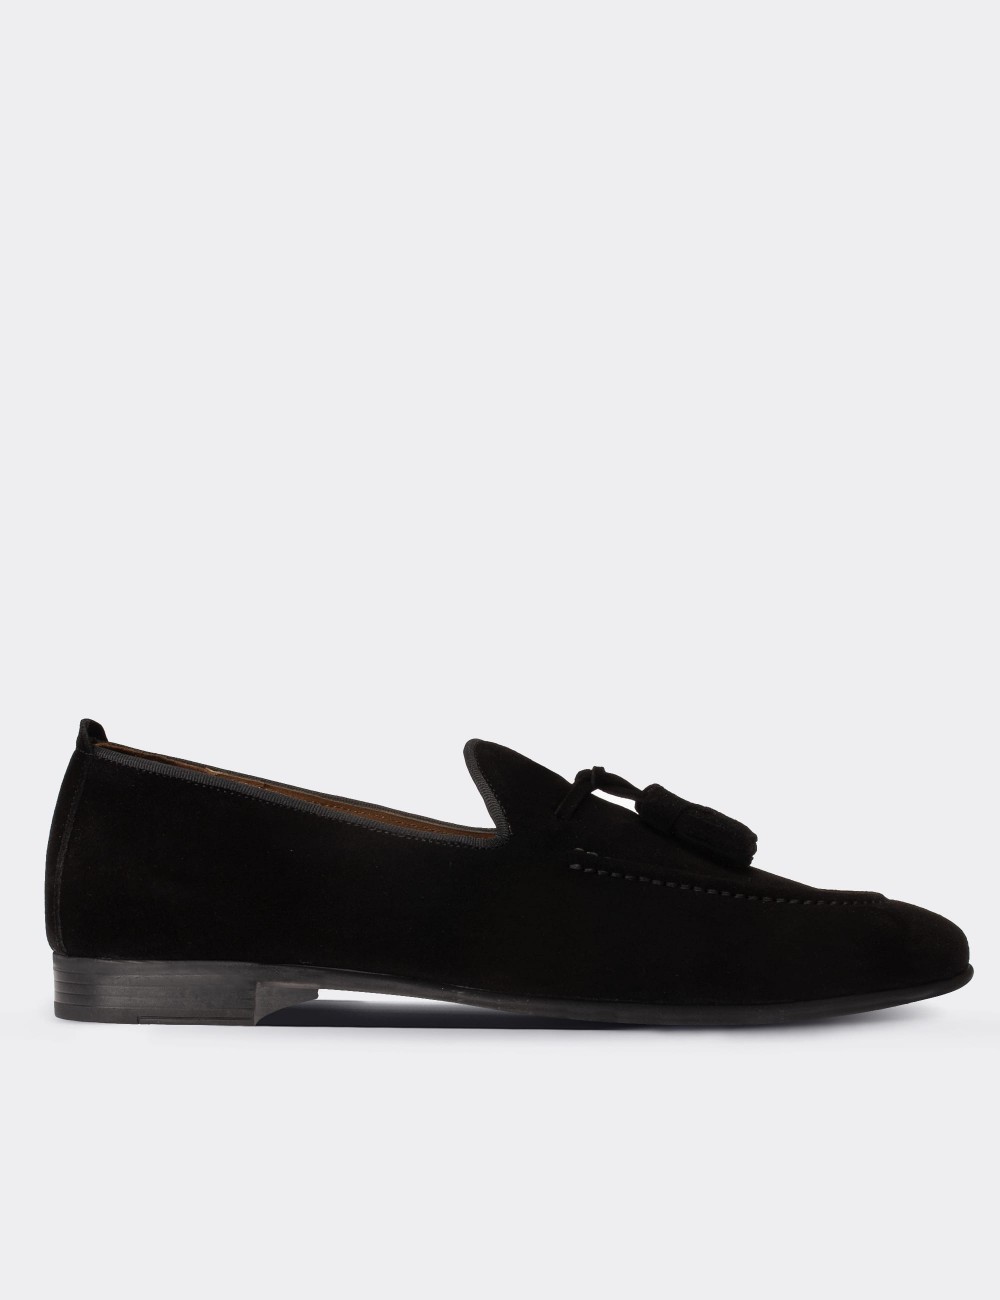 Black Suede Leather Loafers - 01701MSYHC06